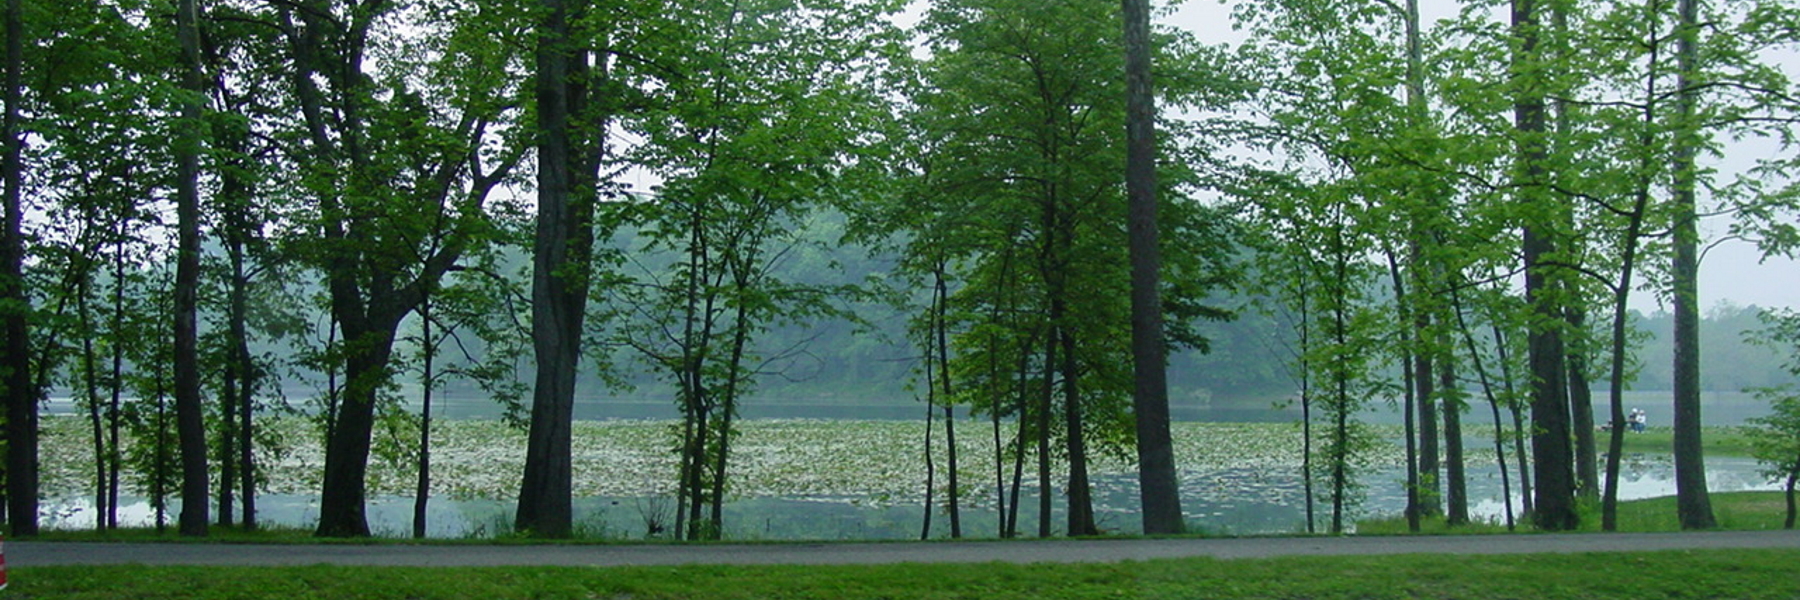 Path View of Trees and Lake